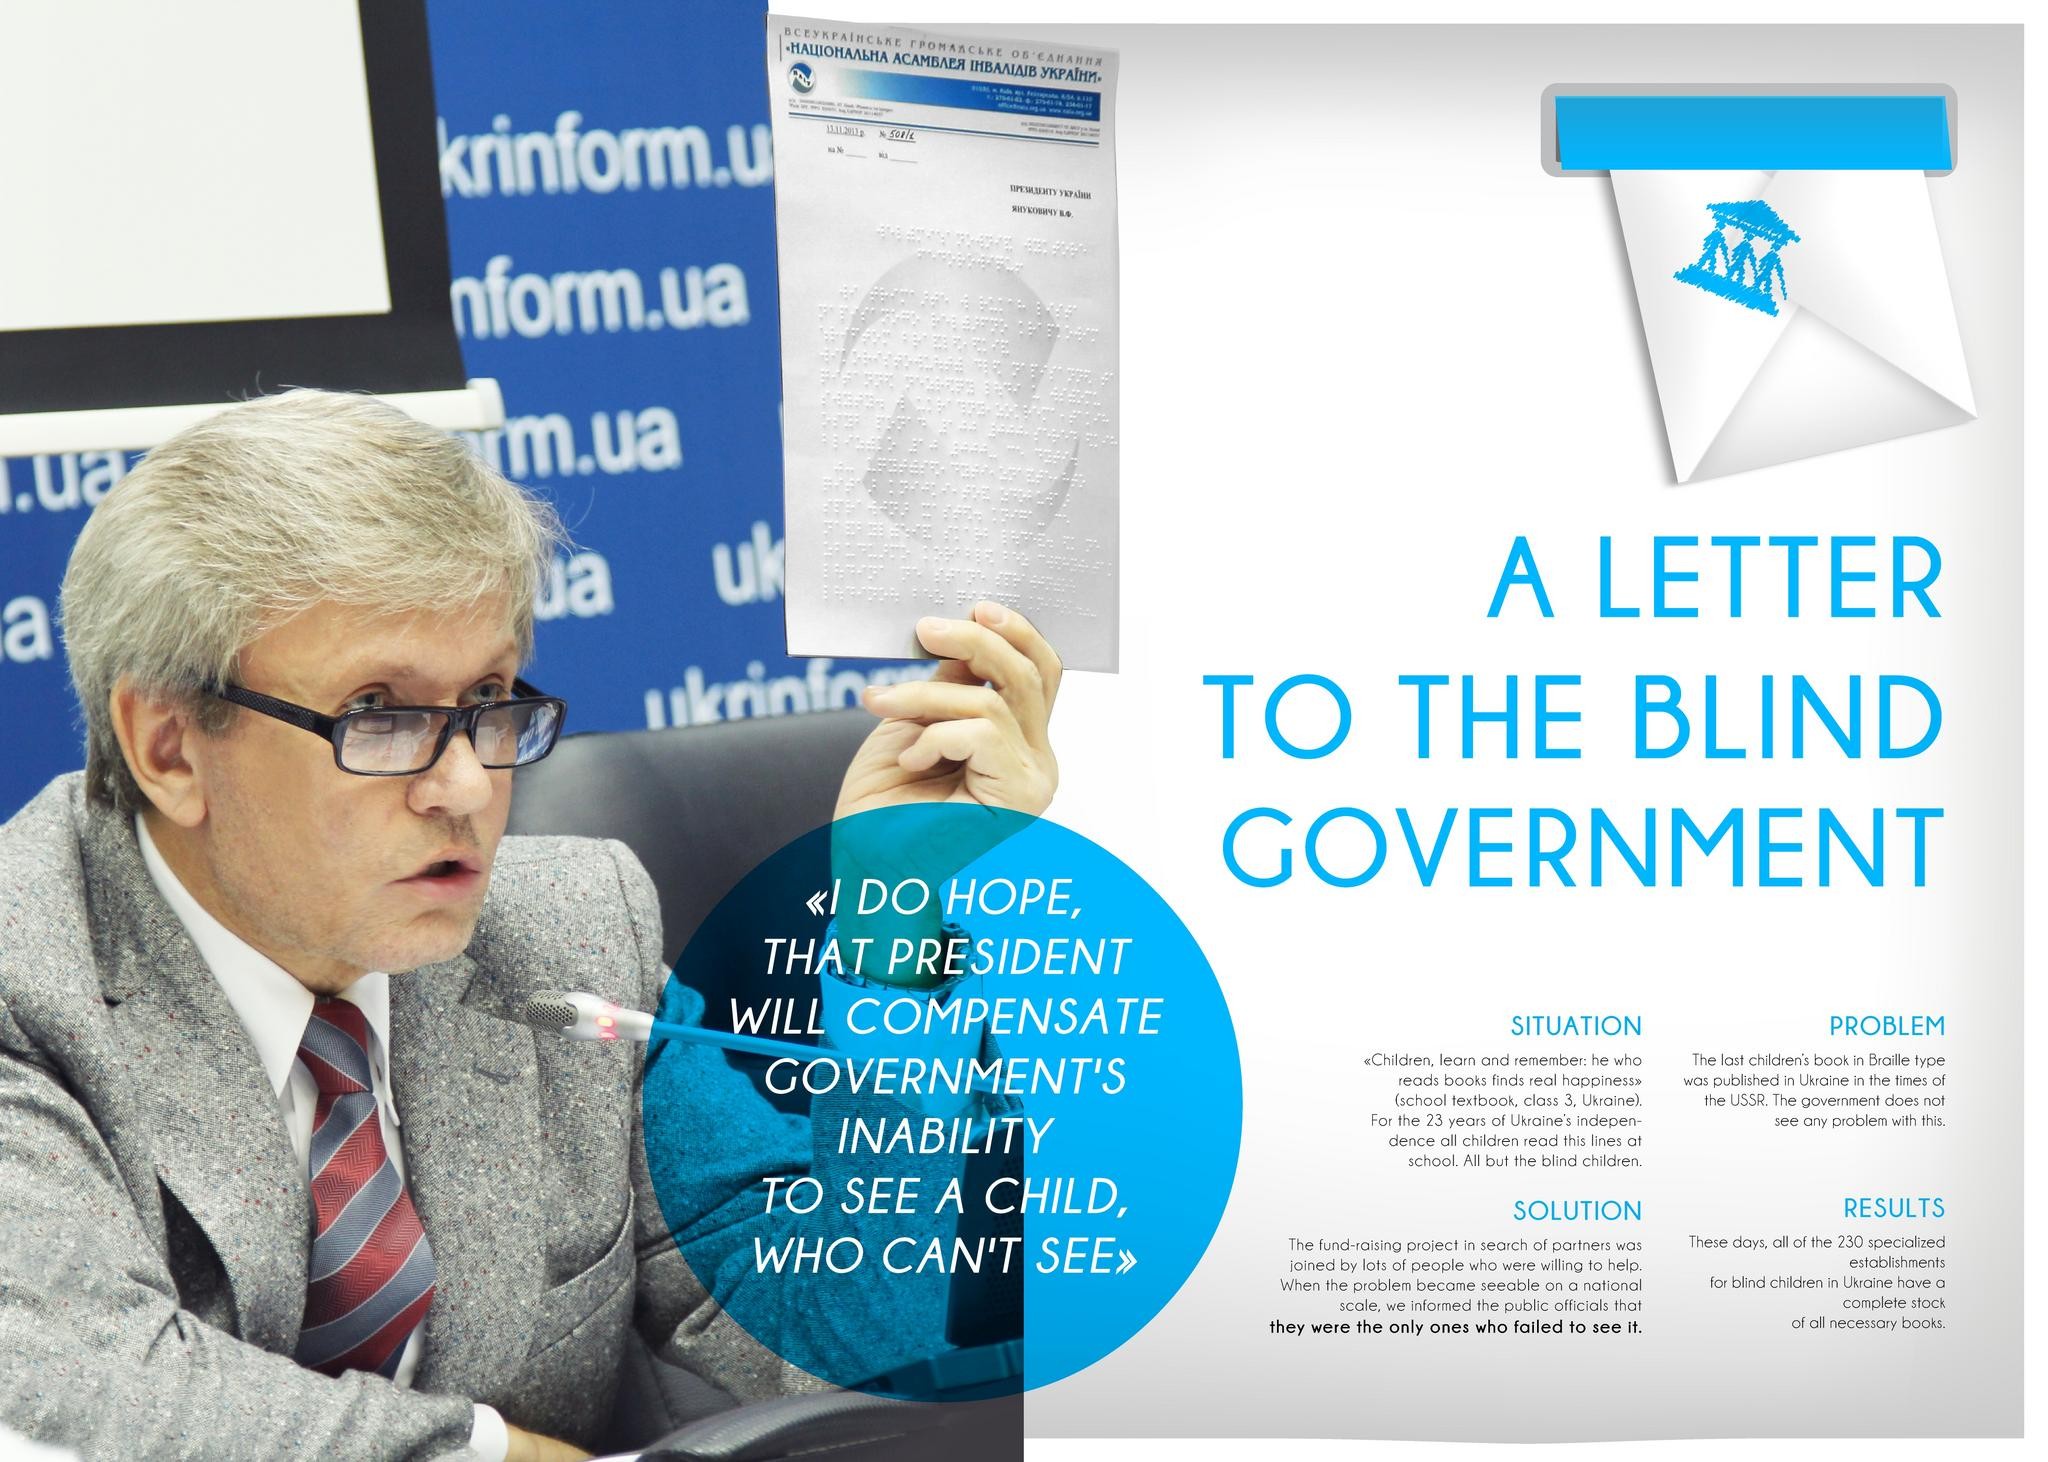 A LETTER TO THE BLIND GOVERNMENT